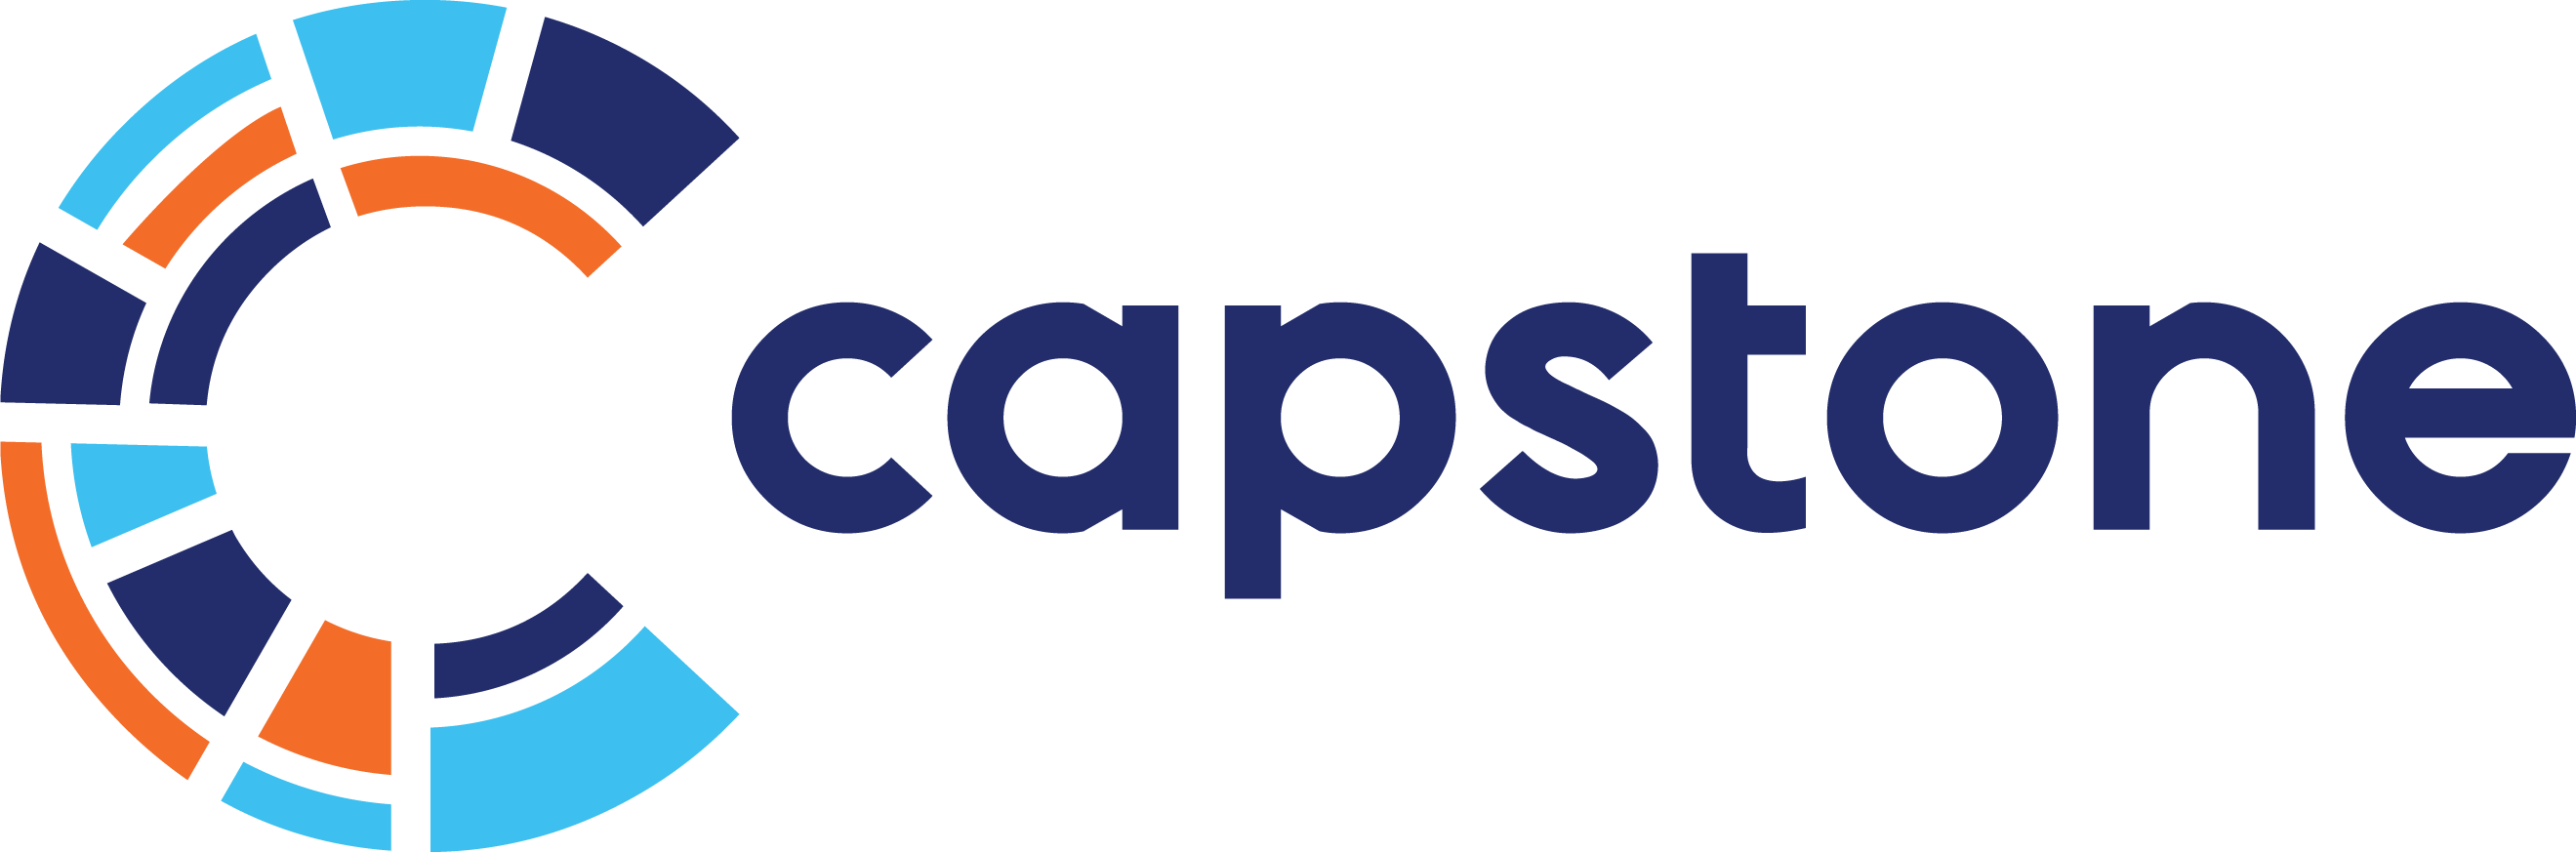 Capstone Companies | Nationwide Leader in Multi-Housing Investment